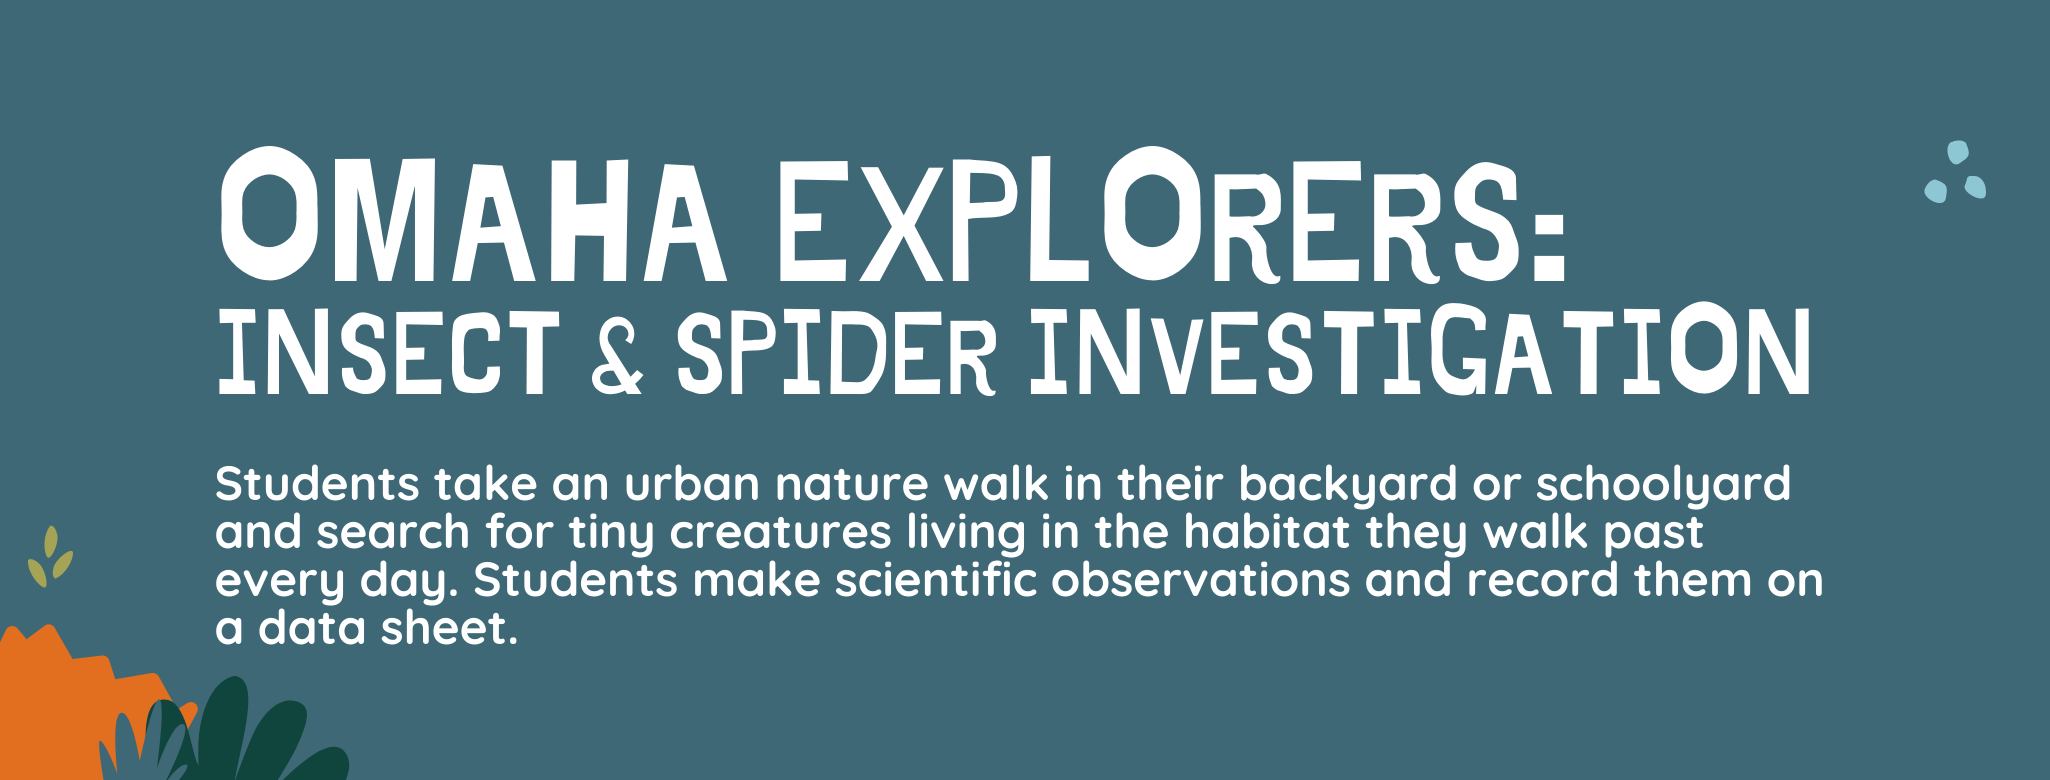 Omaha Explorers: Insect & Spider Investigation